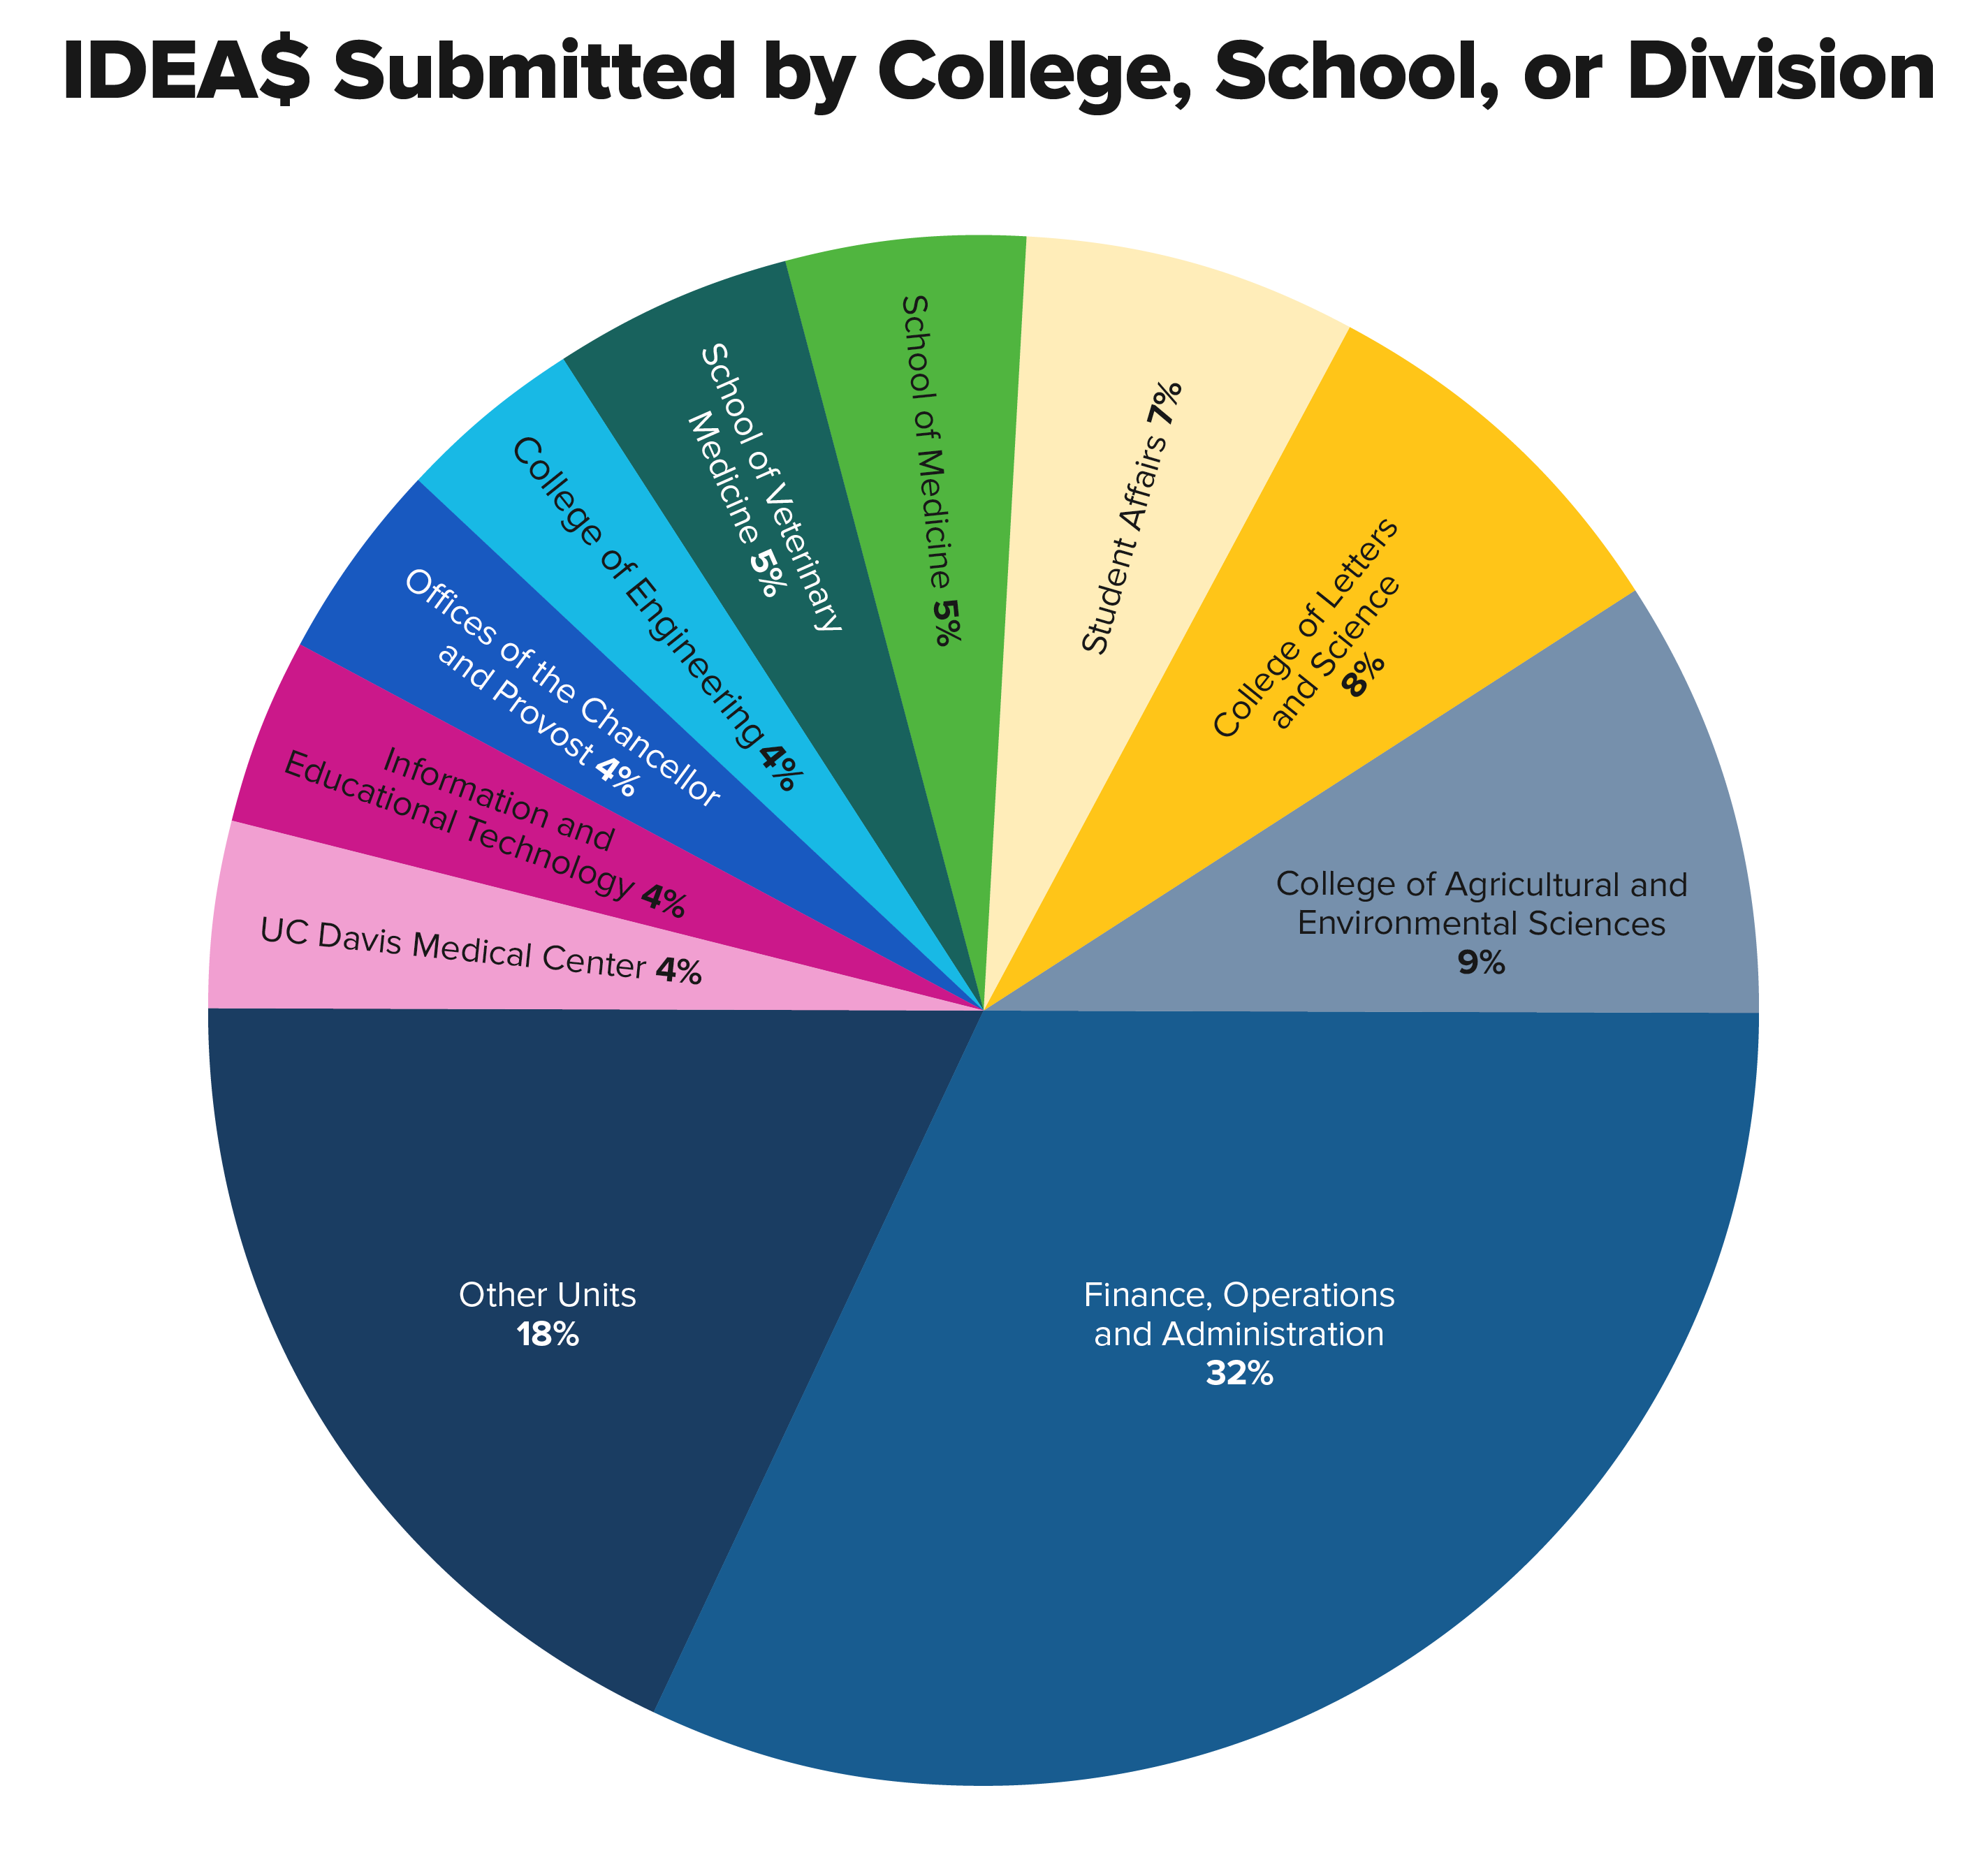 Pie chart shows "IDEA$ submitted by colleges, schools and divisions" with FOA at 32%, College of Agricultural and Environmental Sciences at 9%, College of Letters and Sciences at 8%, Student Affairs at 7%. Includes 11 total slices.